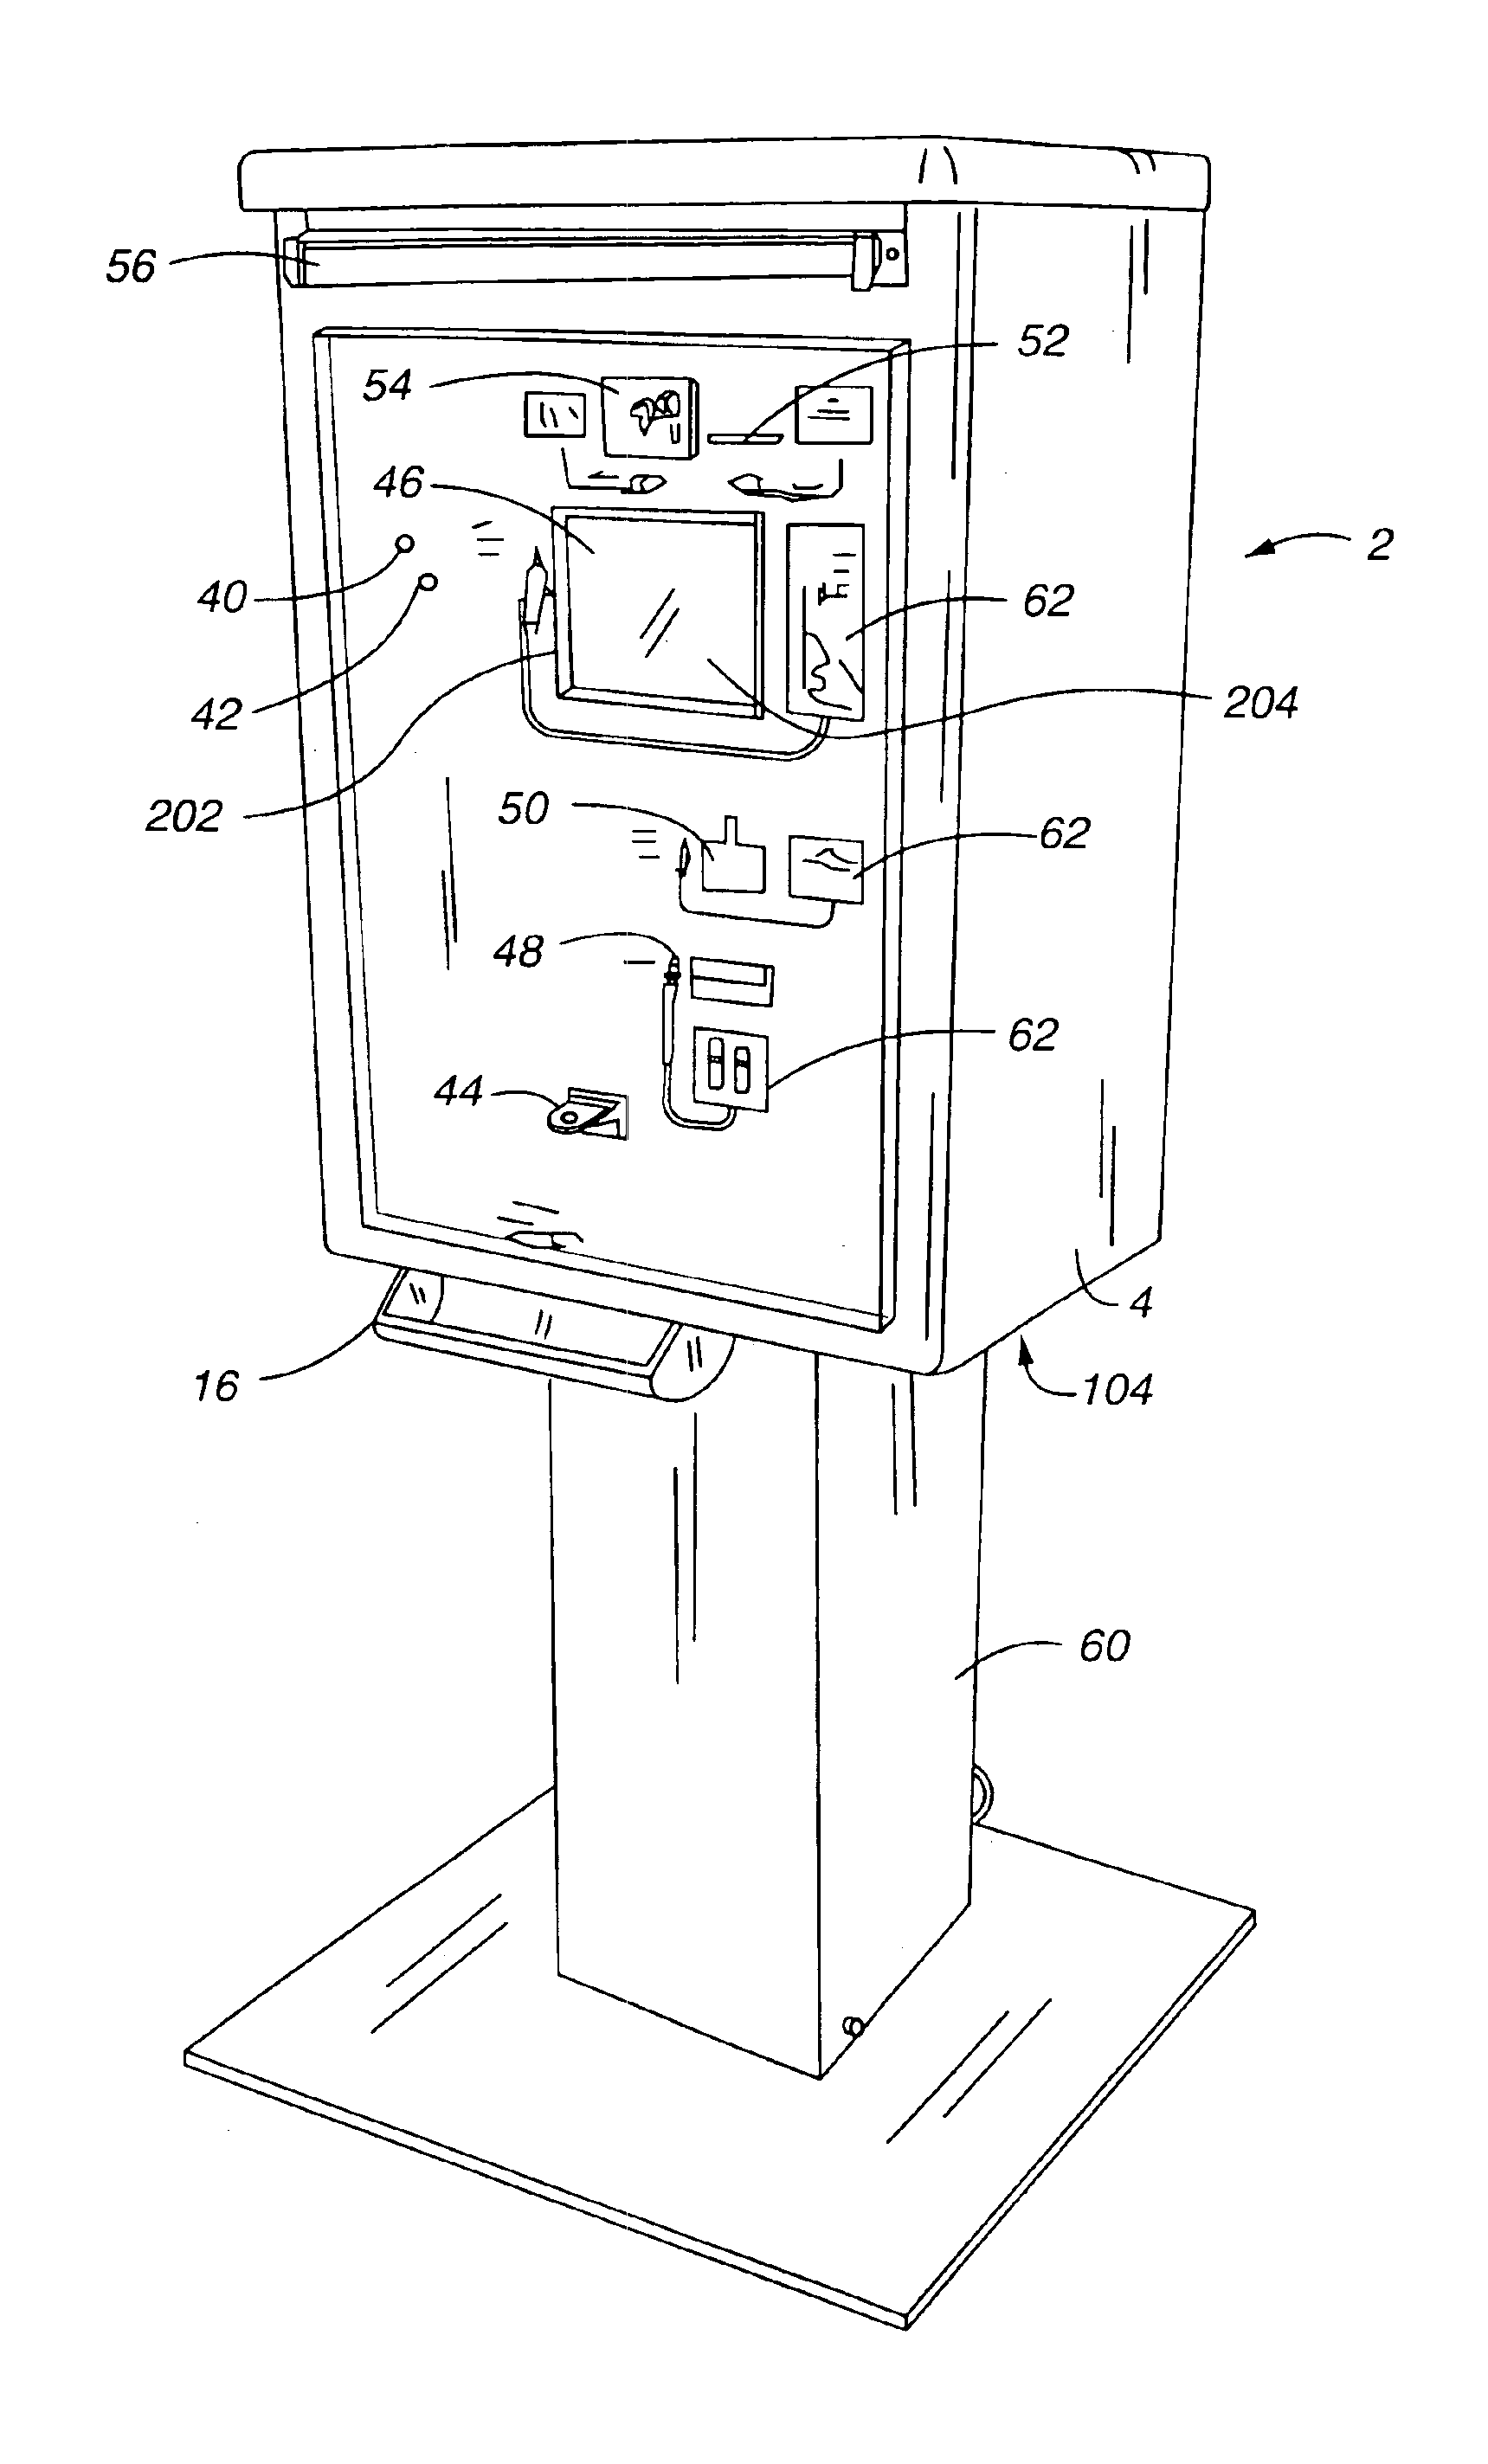 Automated fee collection and parking ticket dispensing machine